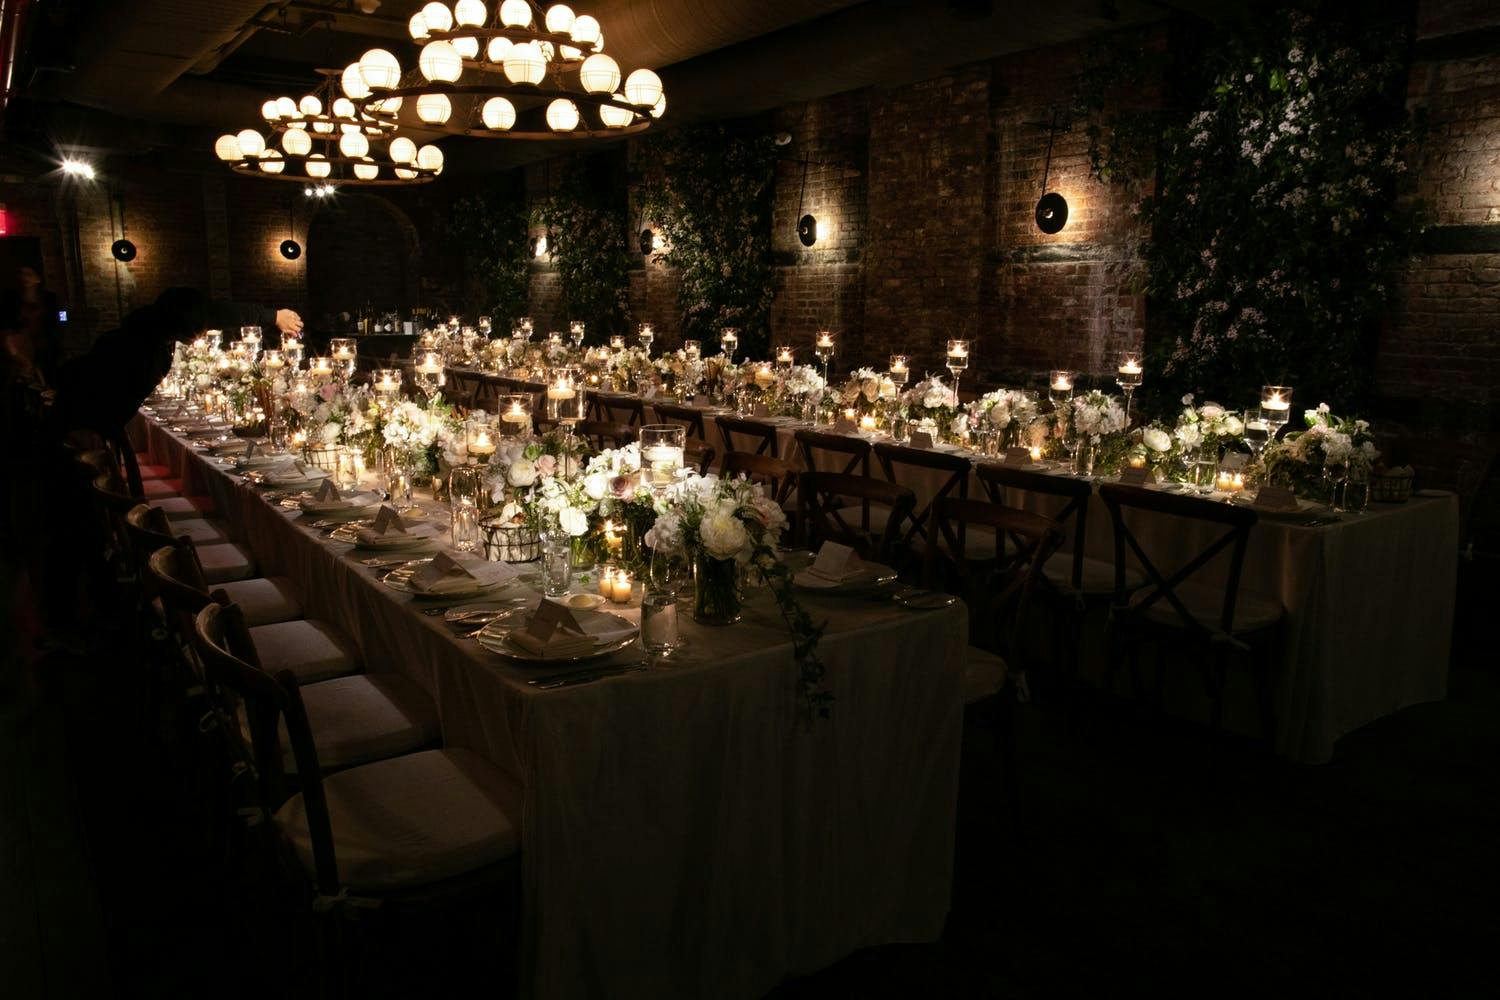 Long table in dark room with candles along the table.